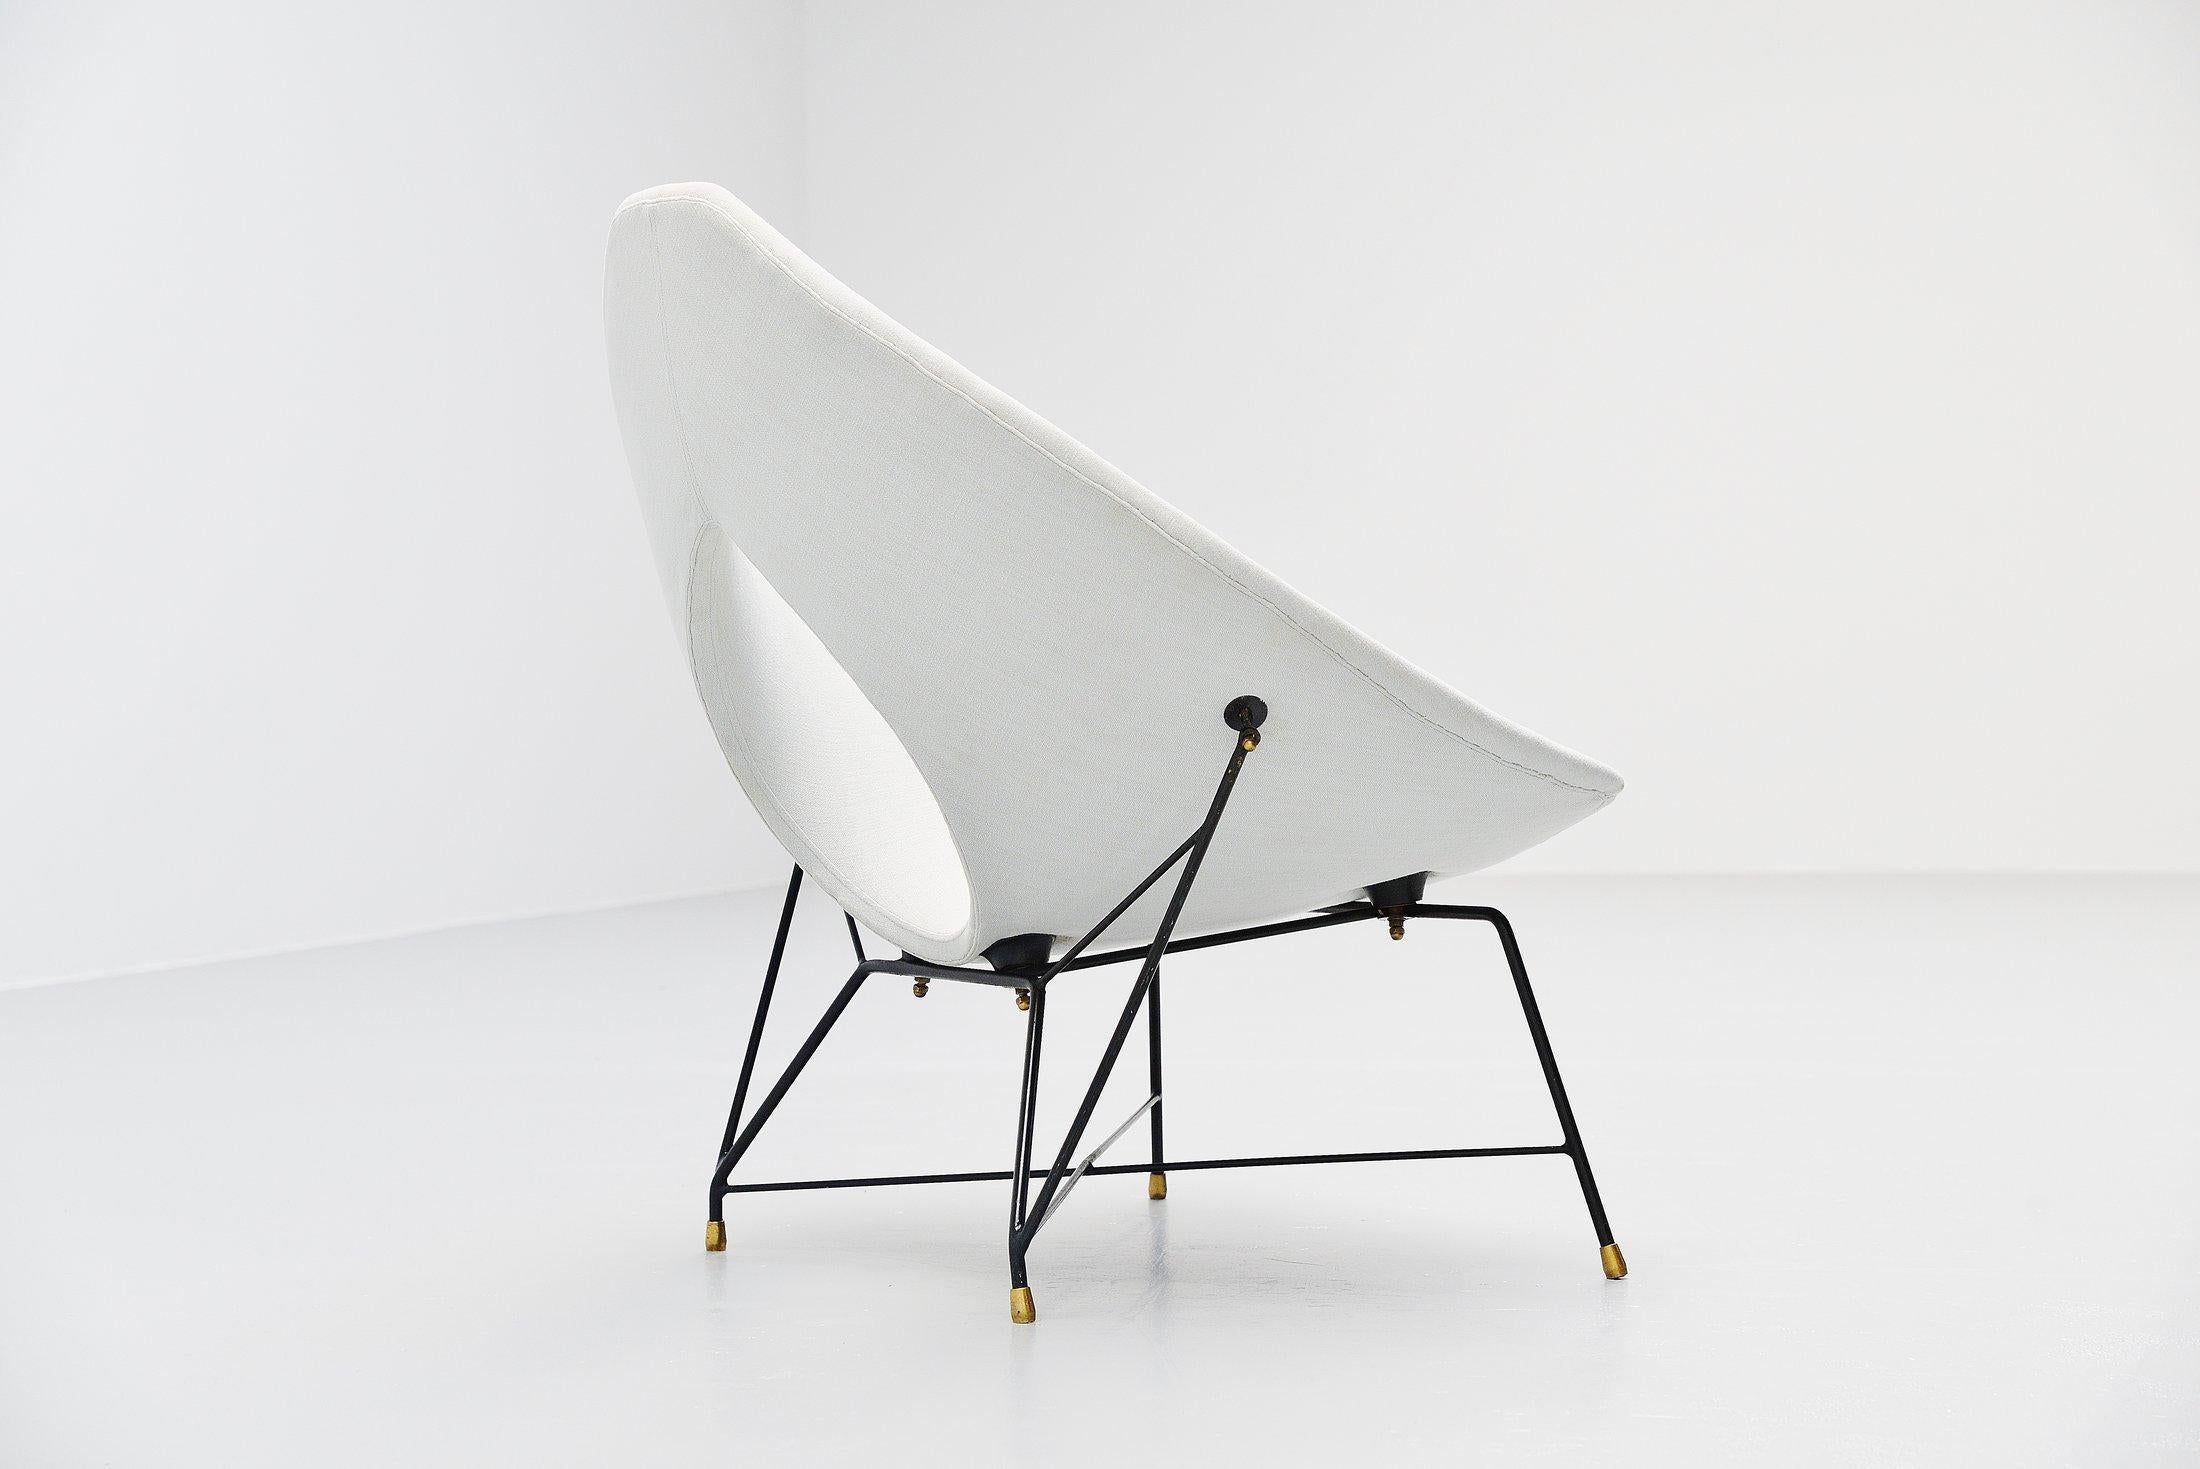 Cold-Painted Augusto Bozzi Cosmos Lounge Chair, Italy, 1954